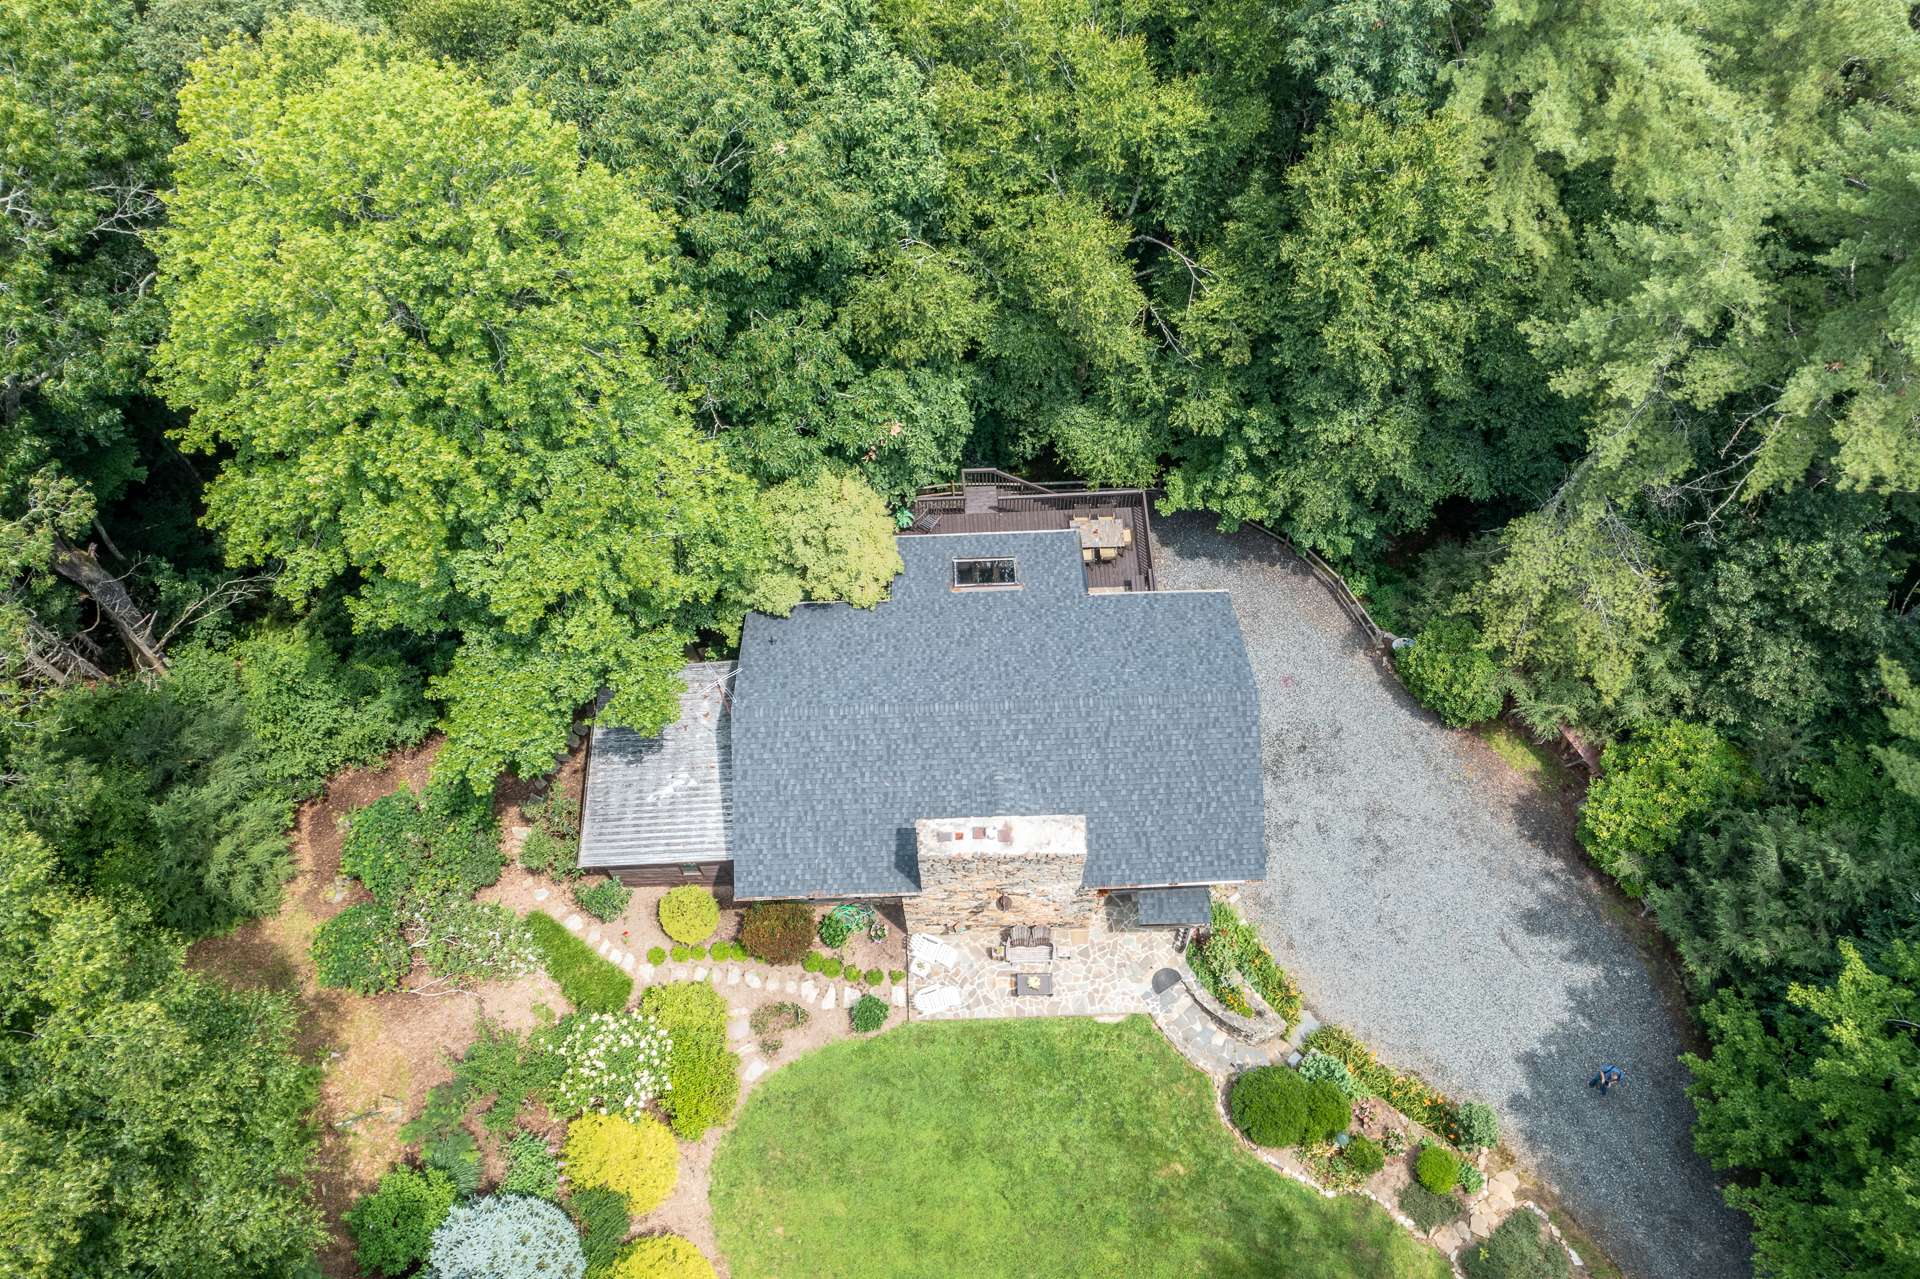 These aerial views show the privacy of the 7+ acre park-like setting.